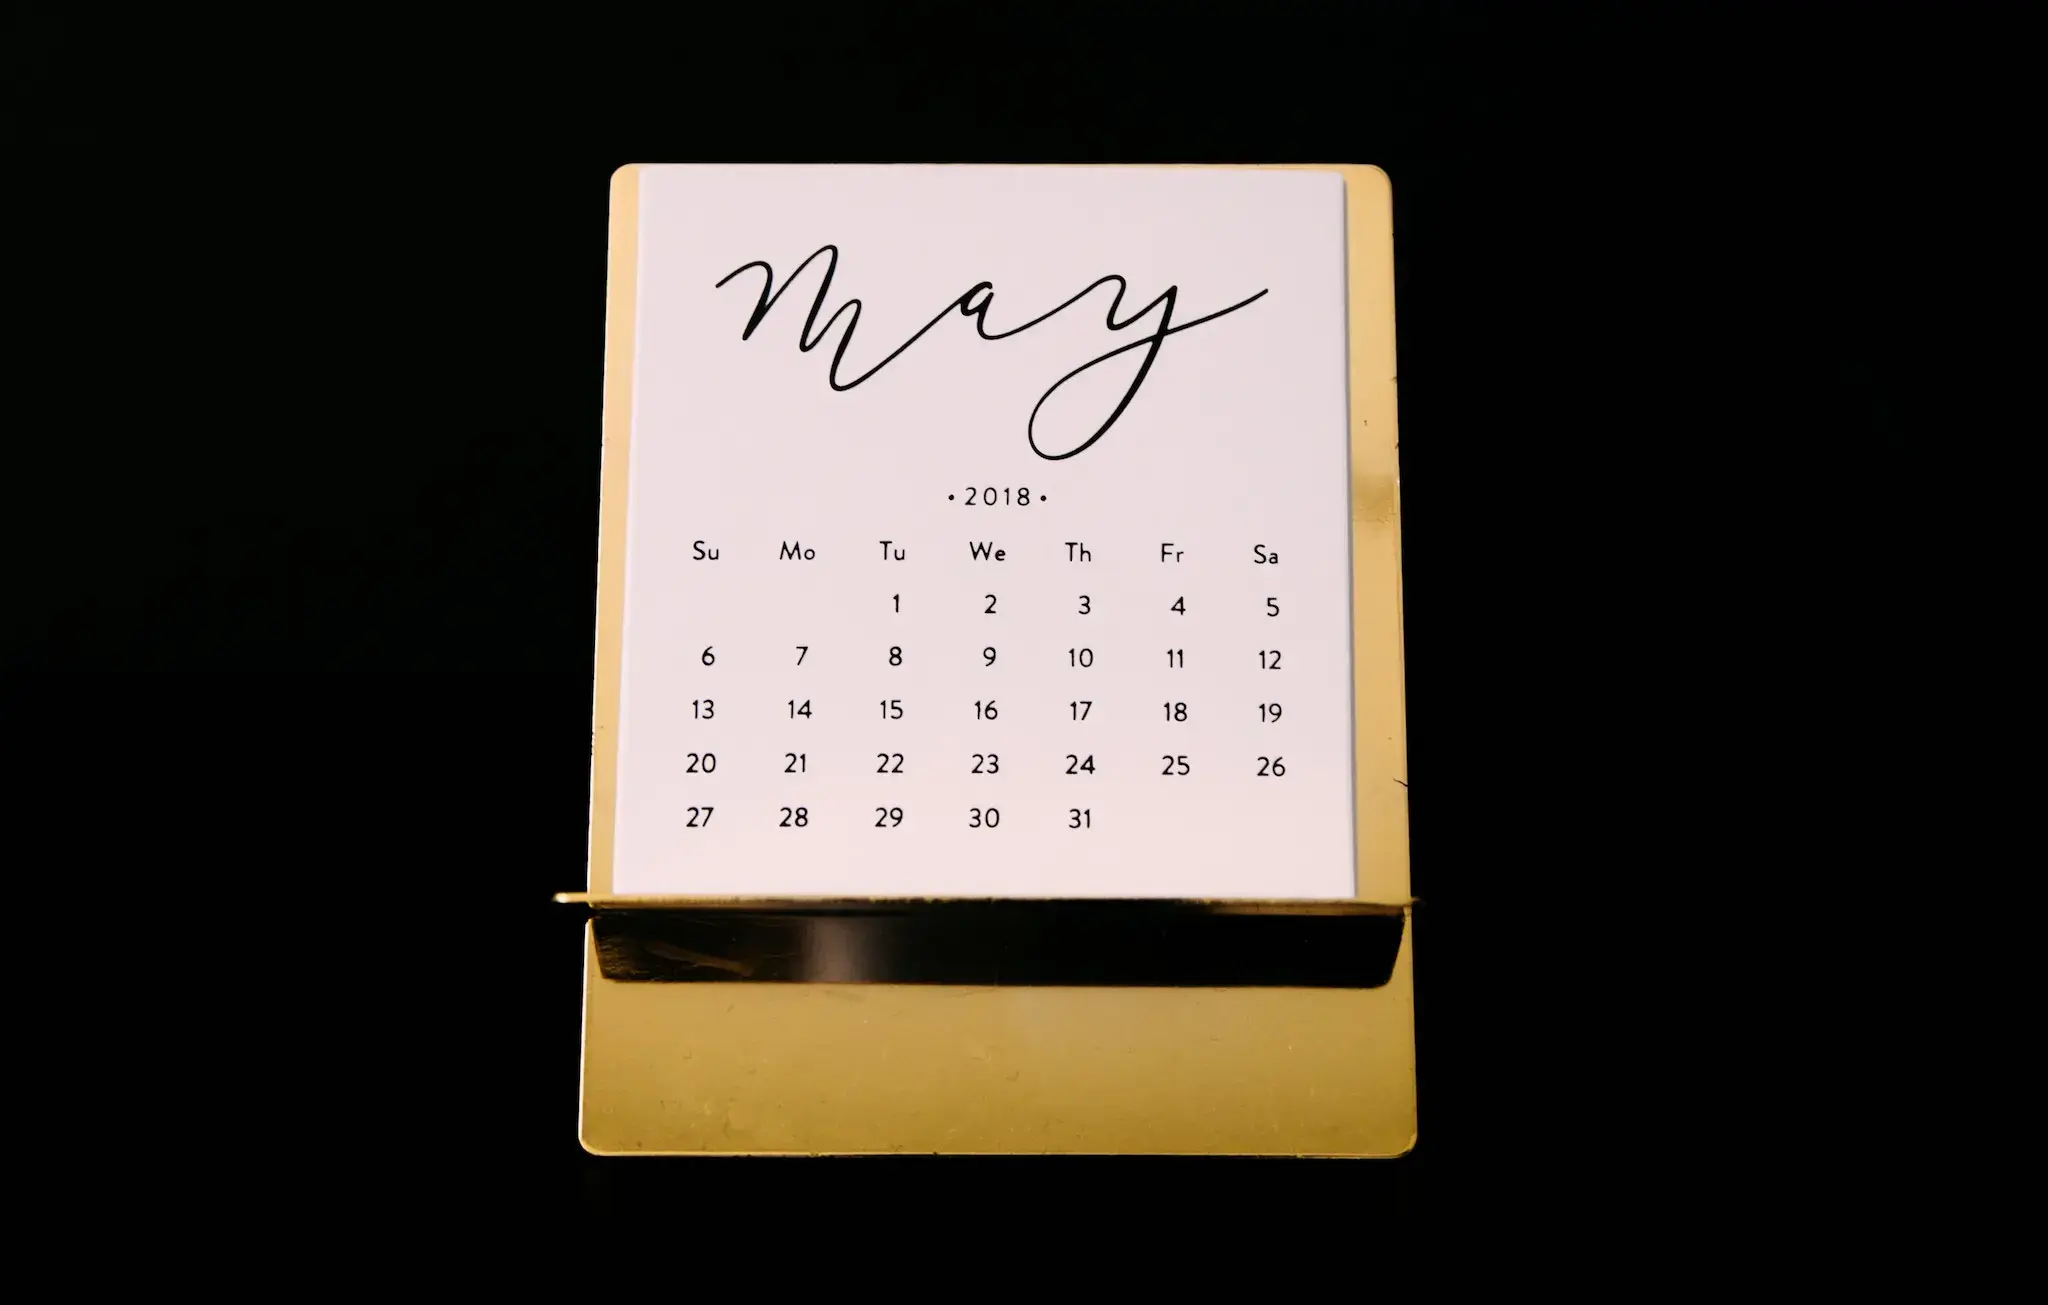 A calendar showing the month of May